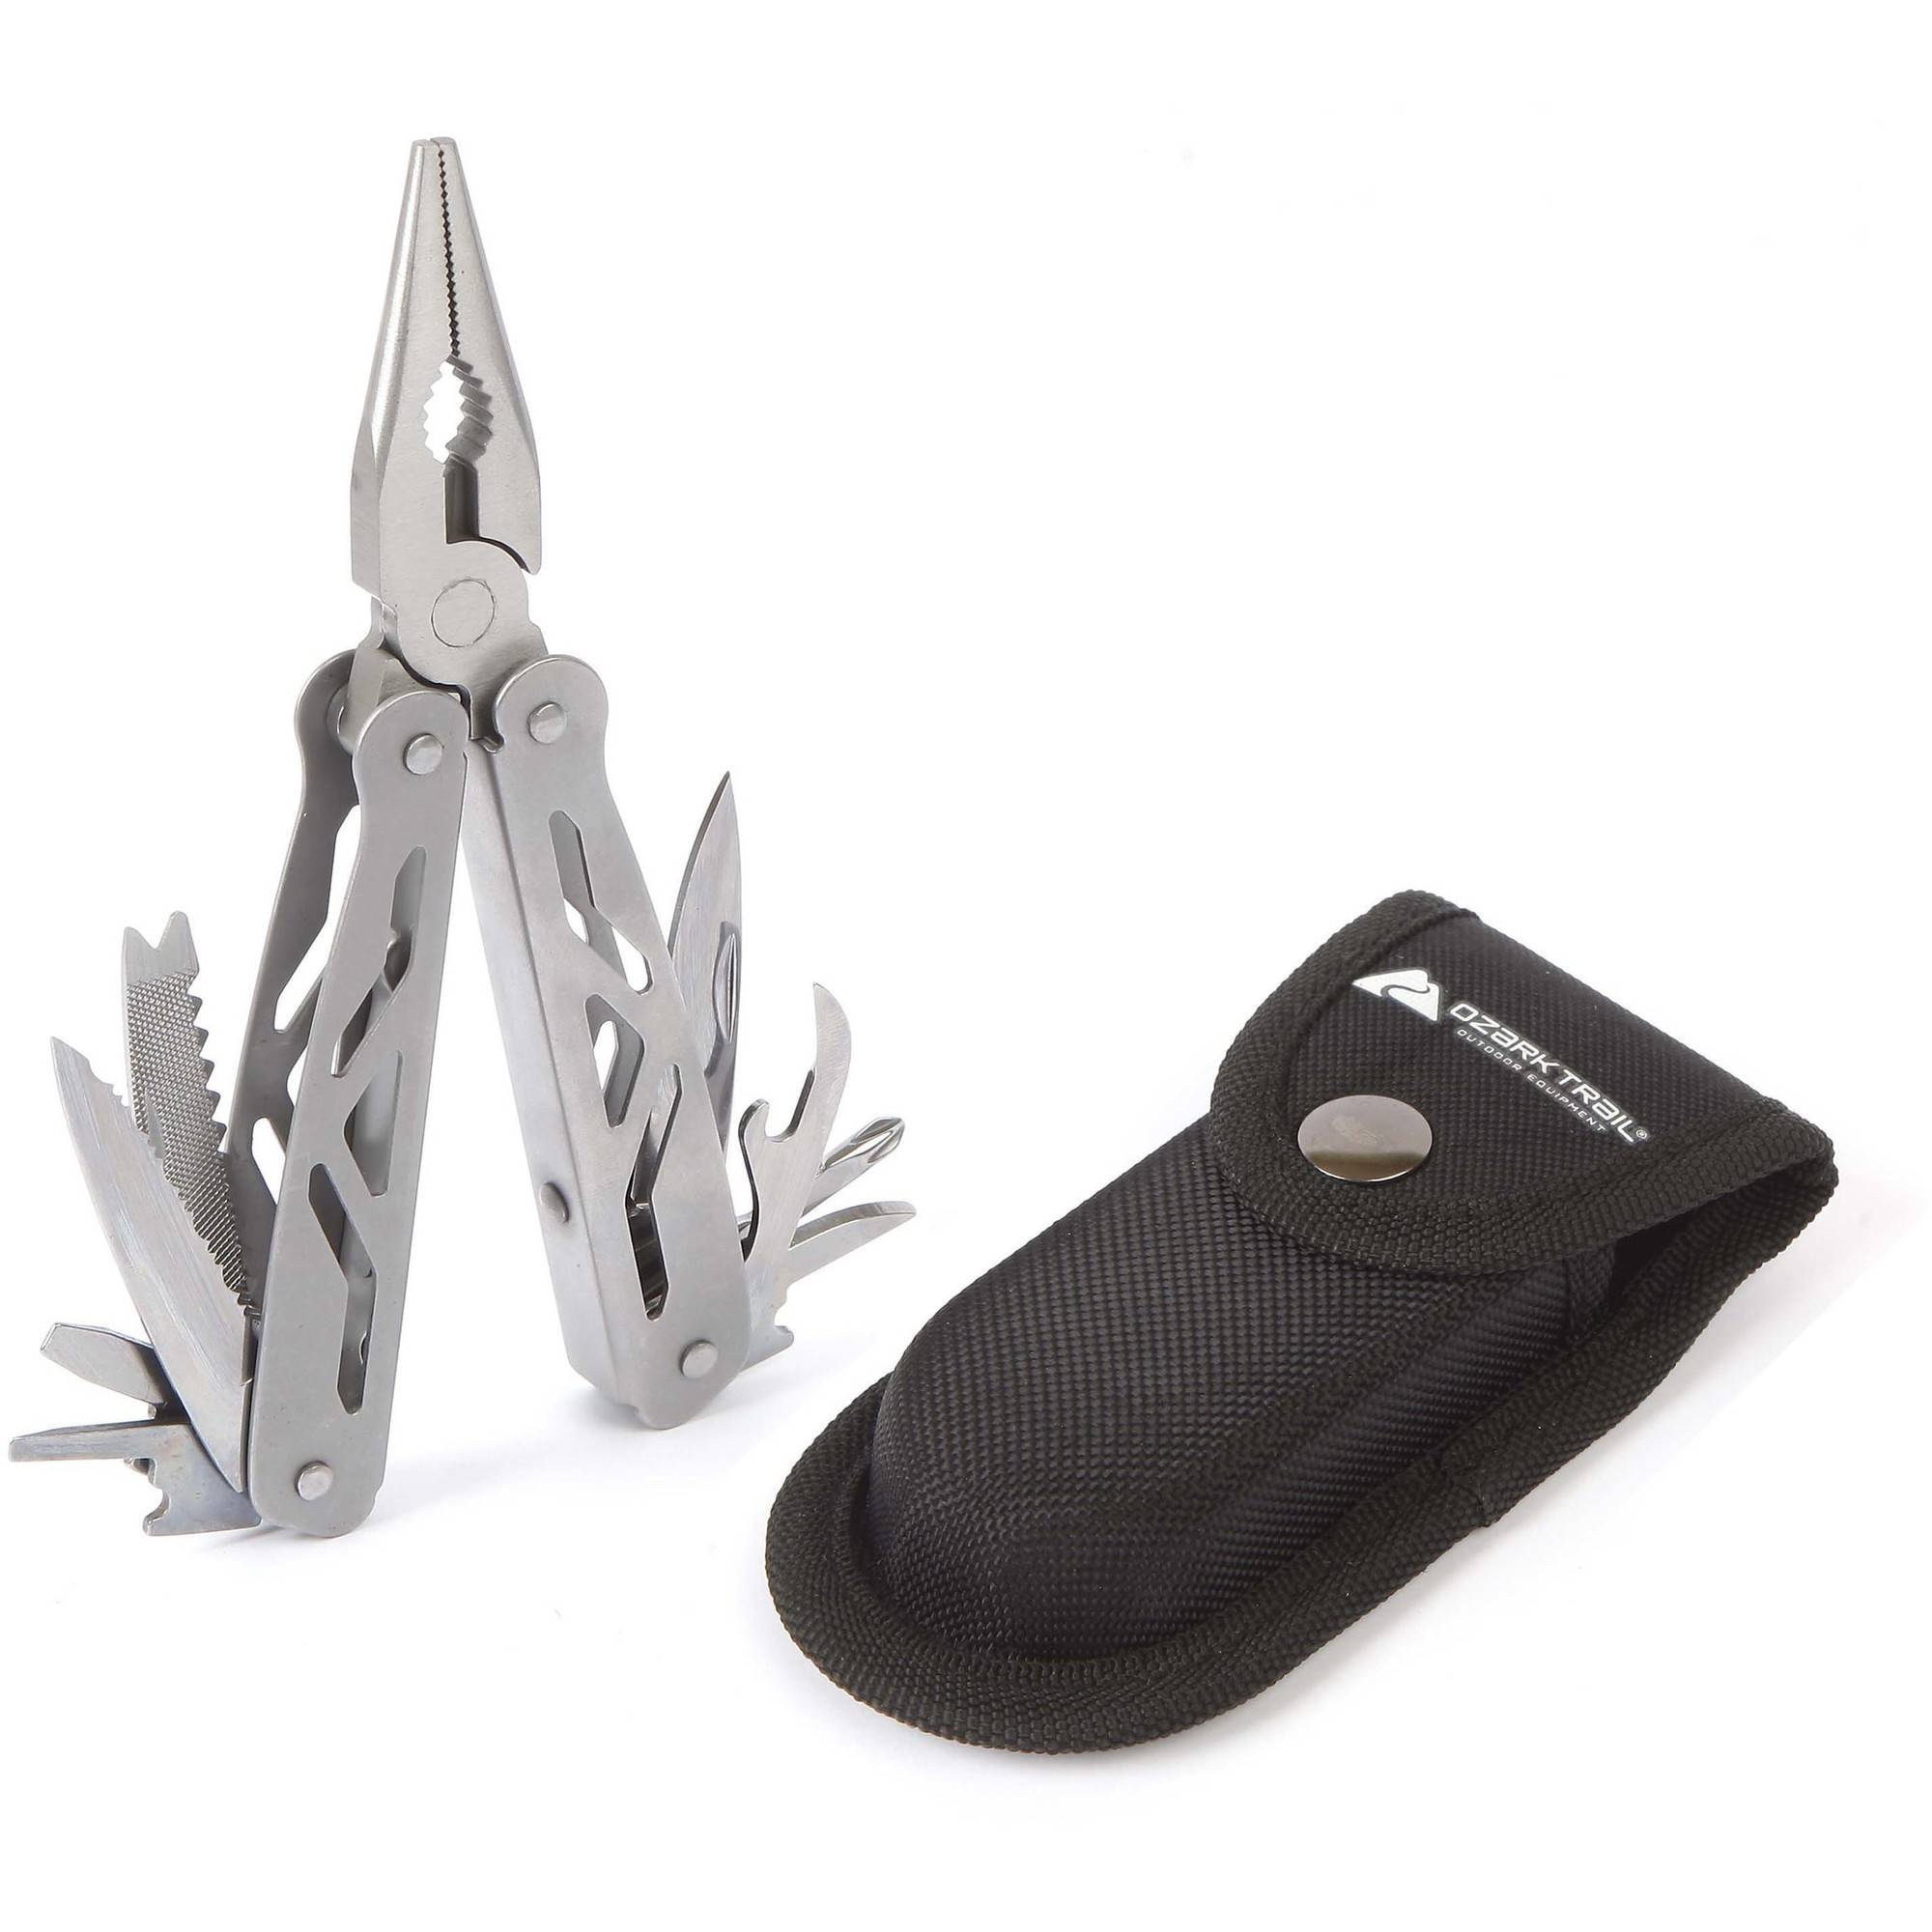 Ozark Trail 14-In-1 Multi-Tool – Just $3.87! Back in stock! Hurry!